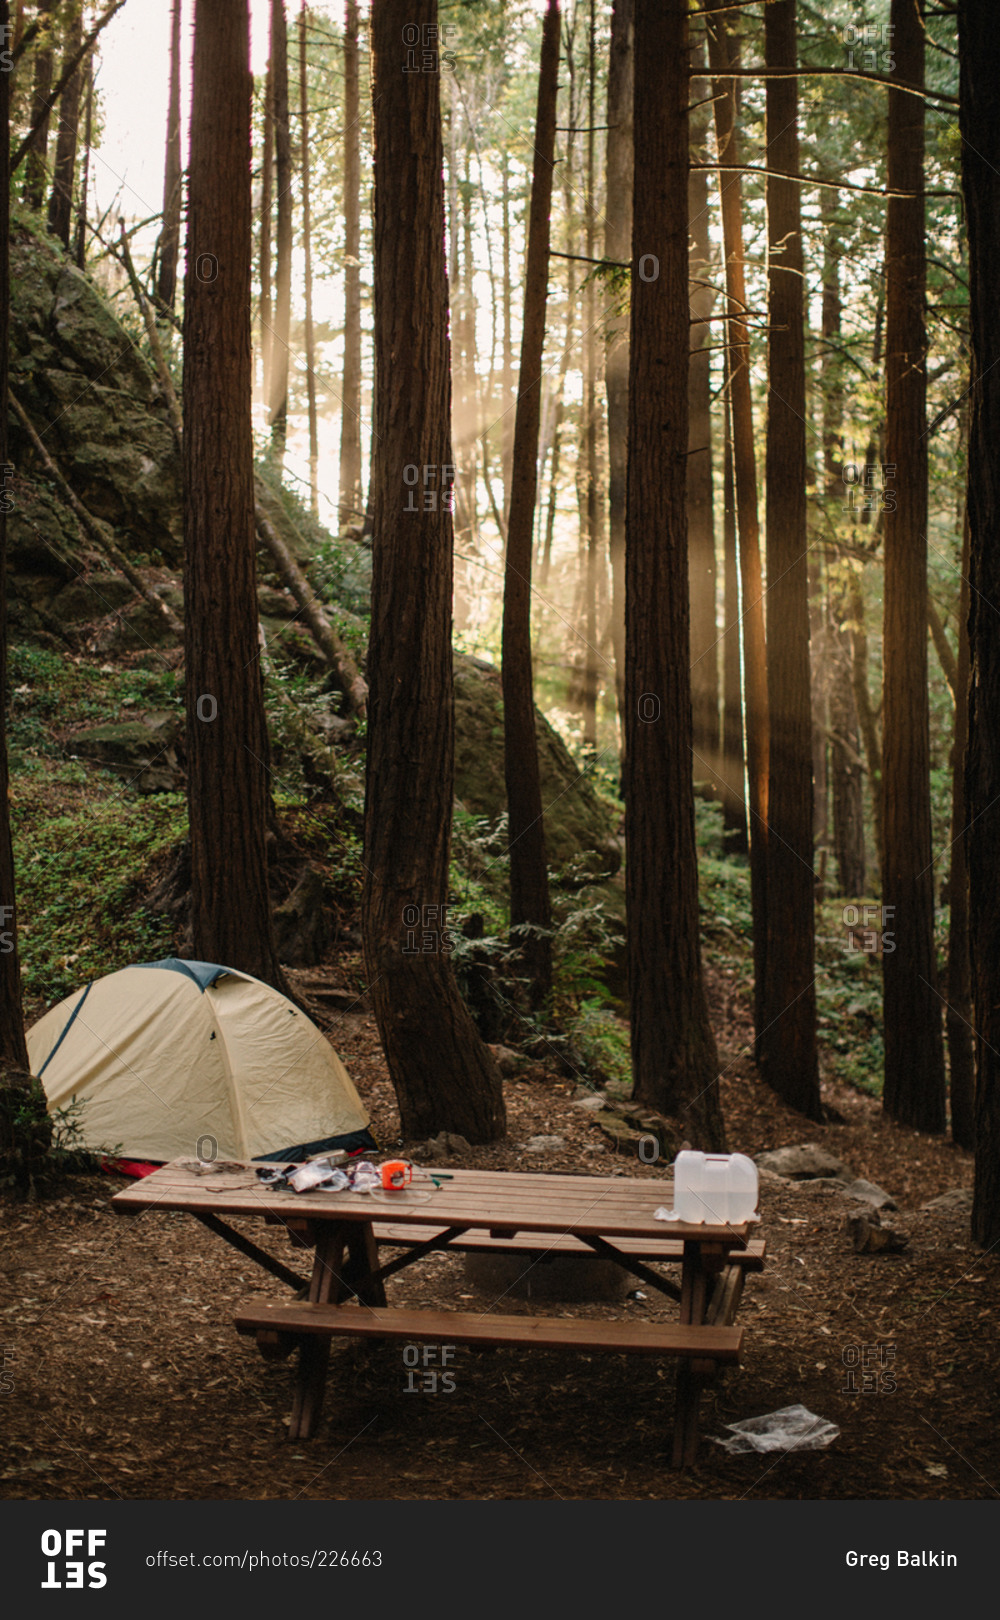 A campsite in a redwood forest